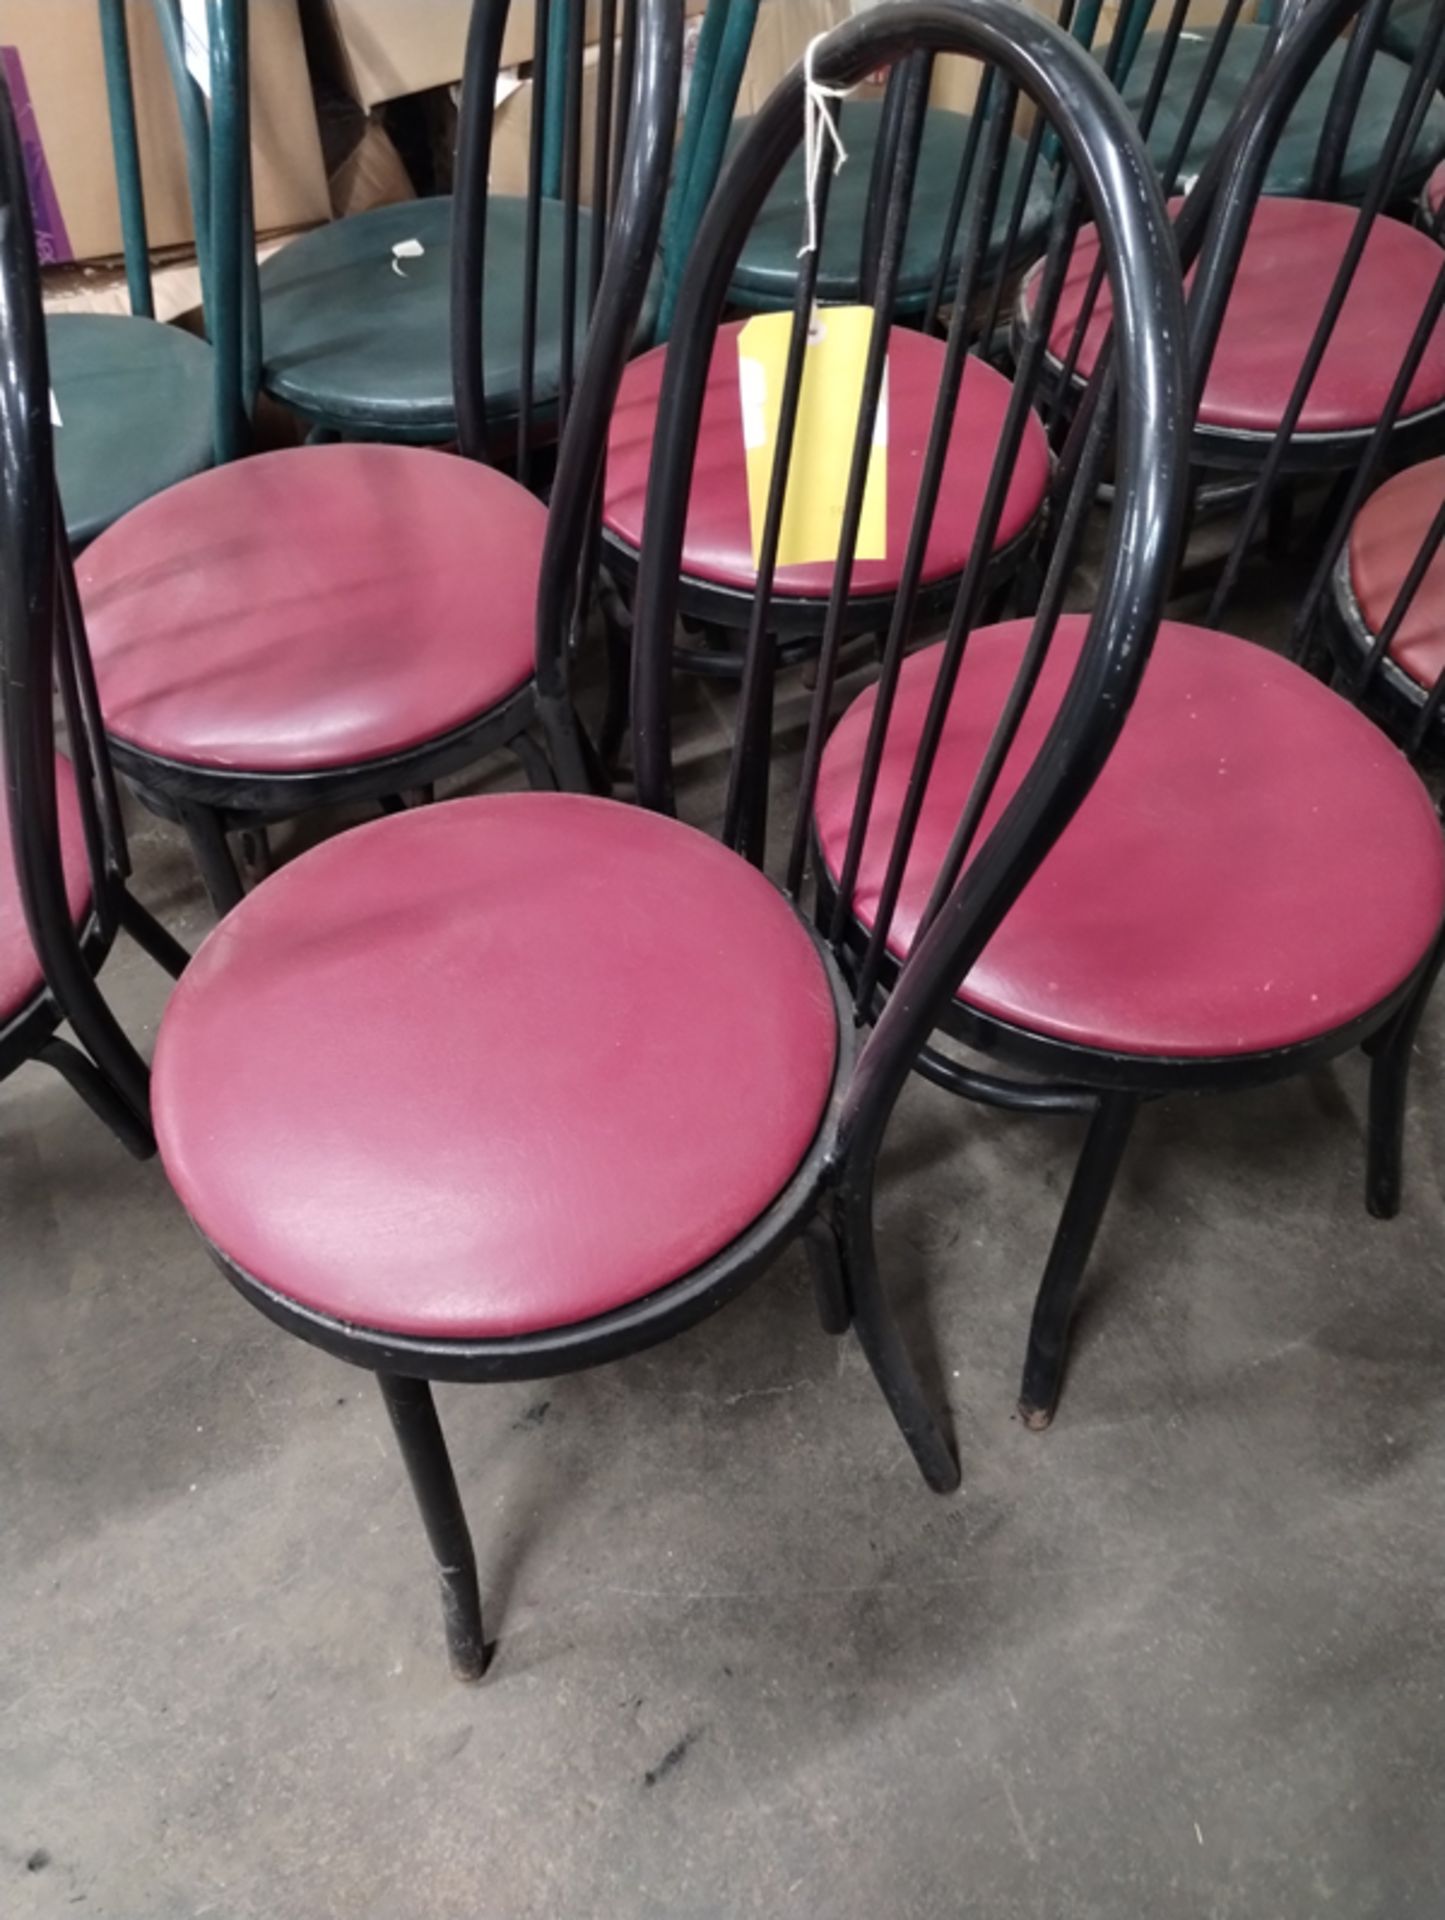 11 RESTAURANT CHAIRS - BLACK AND RED WITH METAL FRAME - Image 4 of 4